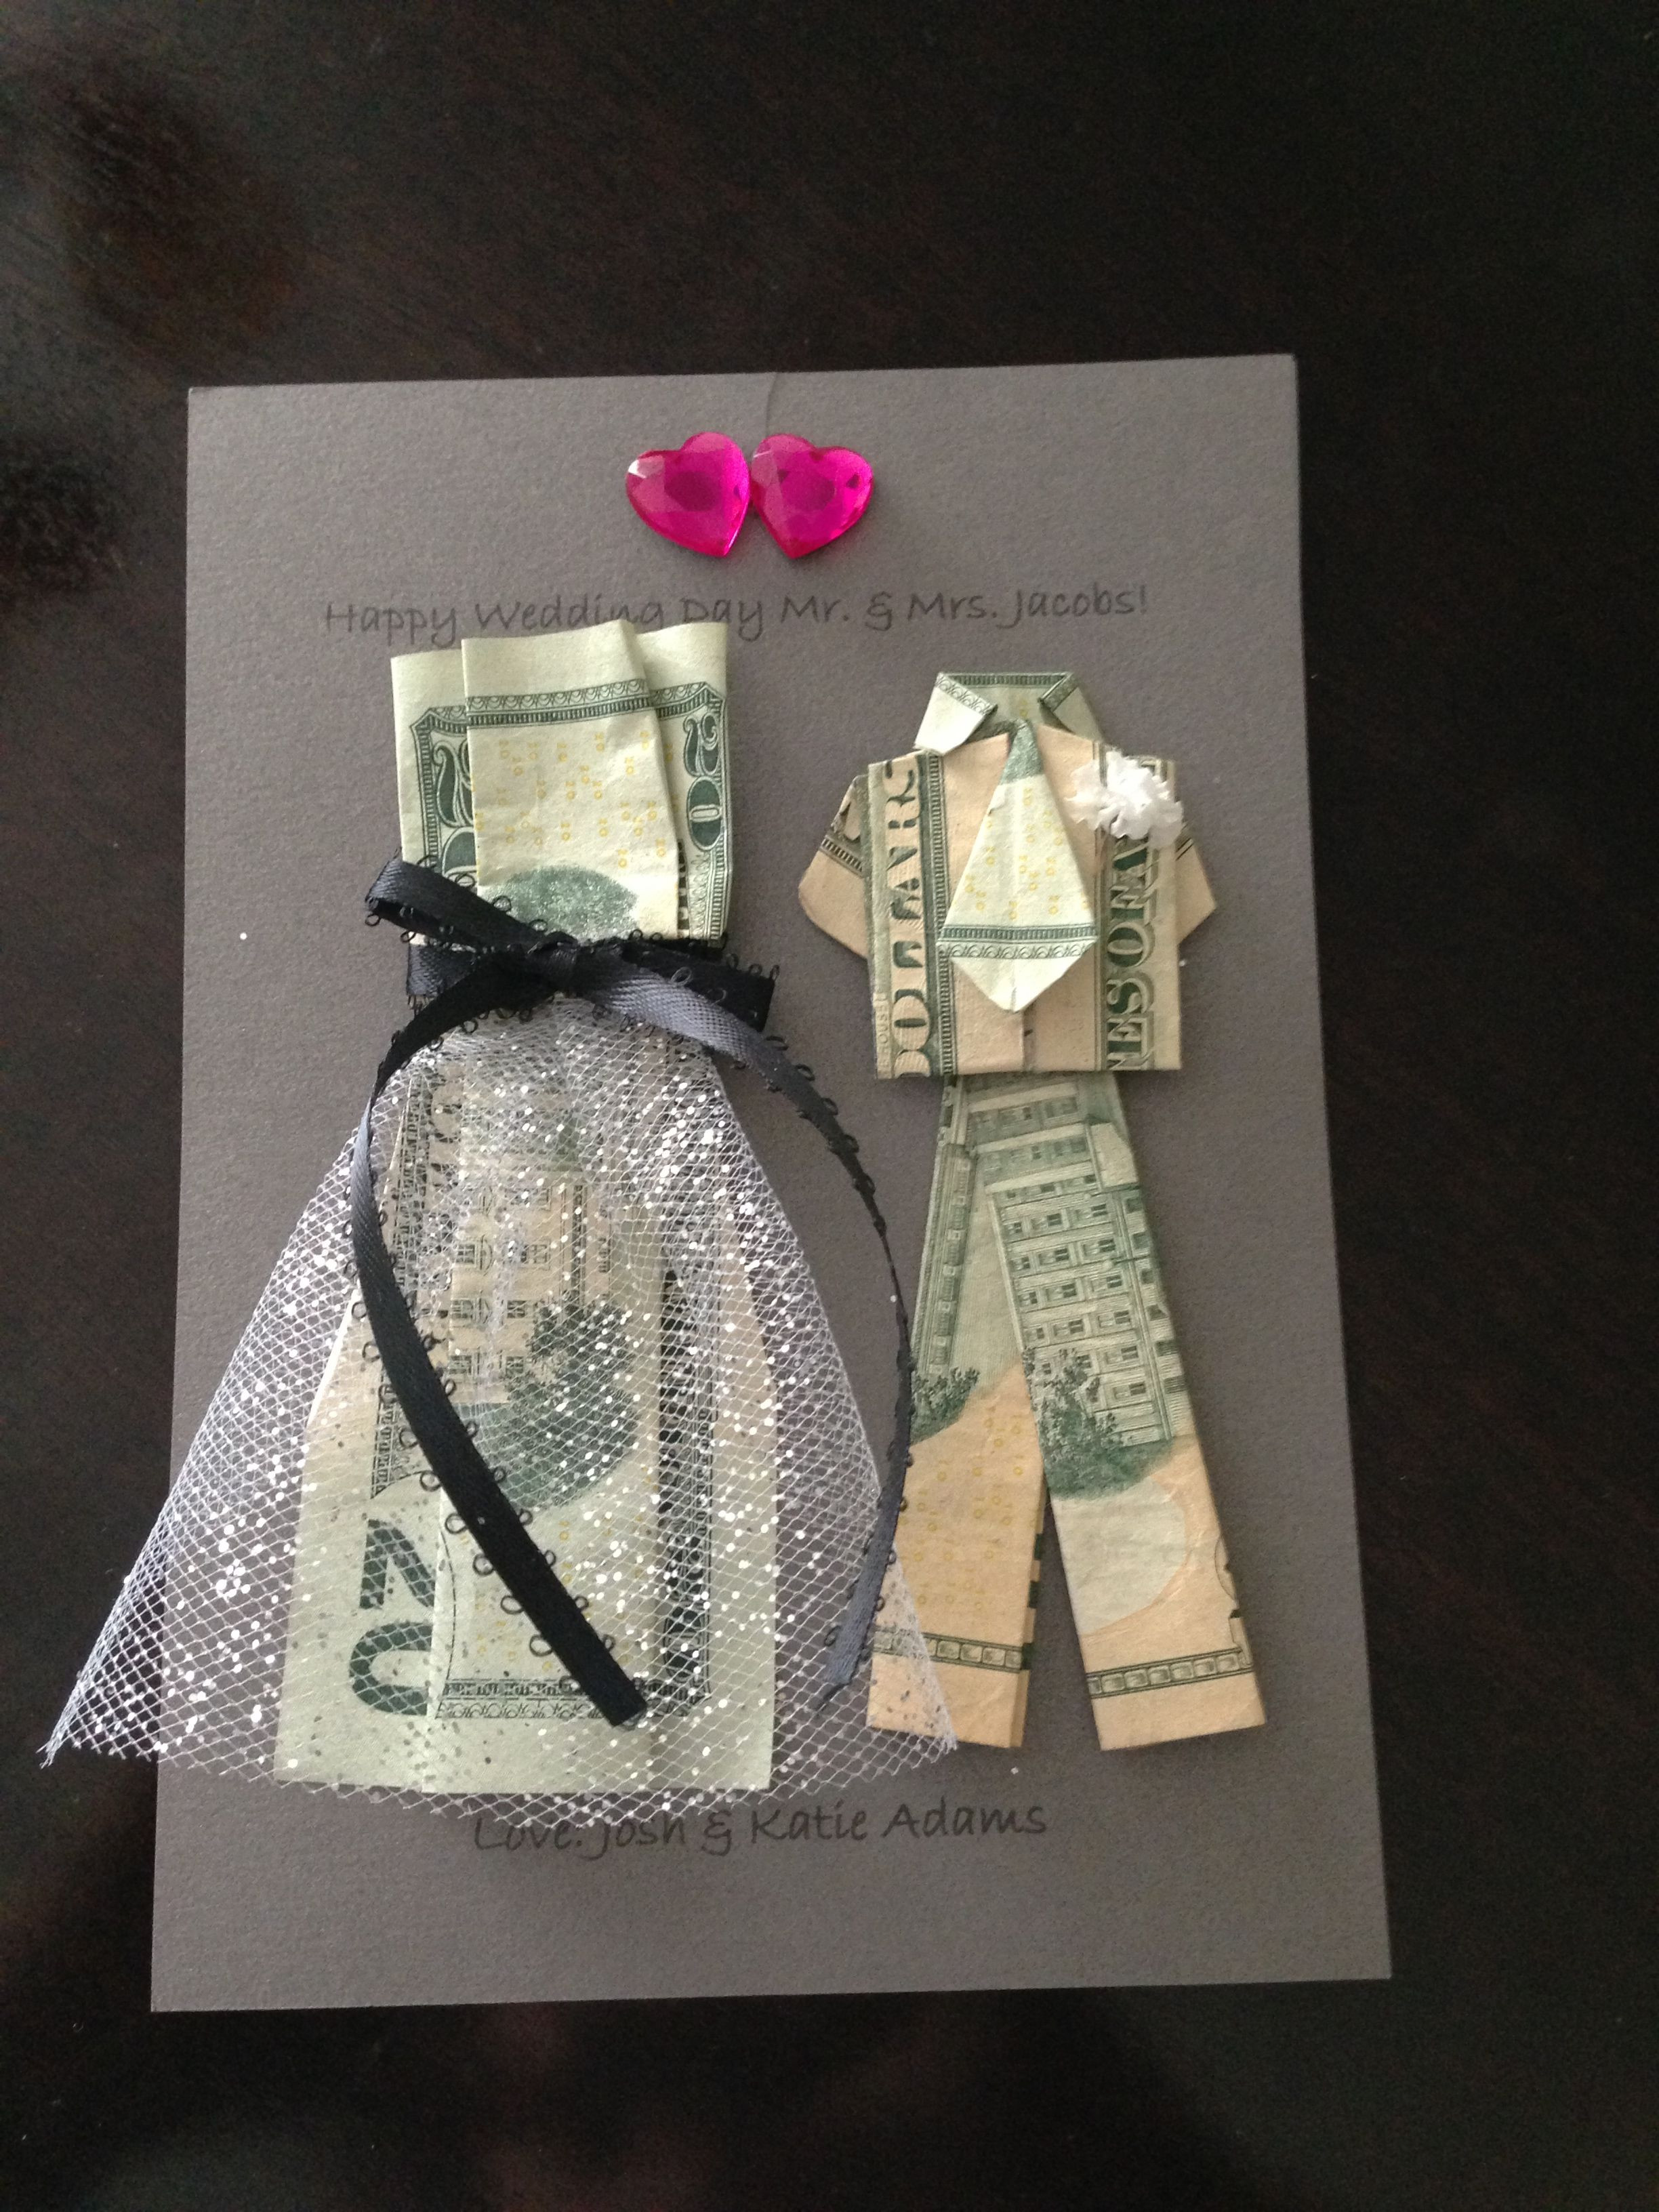 Wedding Gift Ideas For Bride And Groom
 Wedding Money Gifts on Pinterest